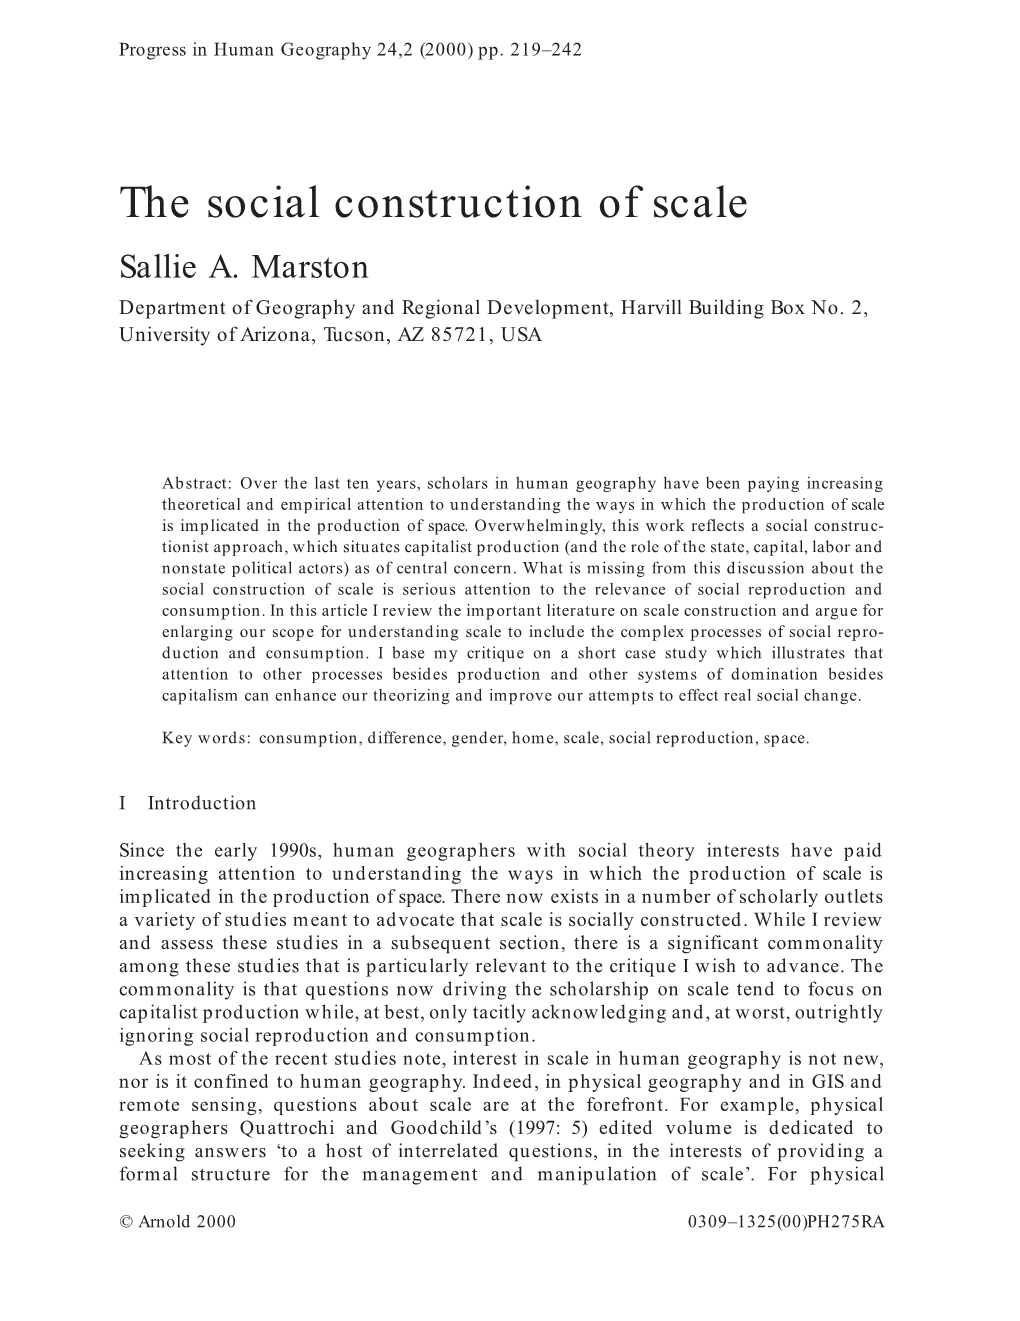 The Social Construction of Scale Sallie A